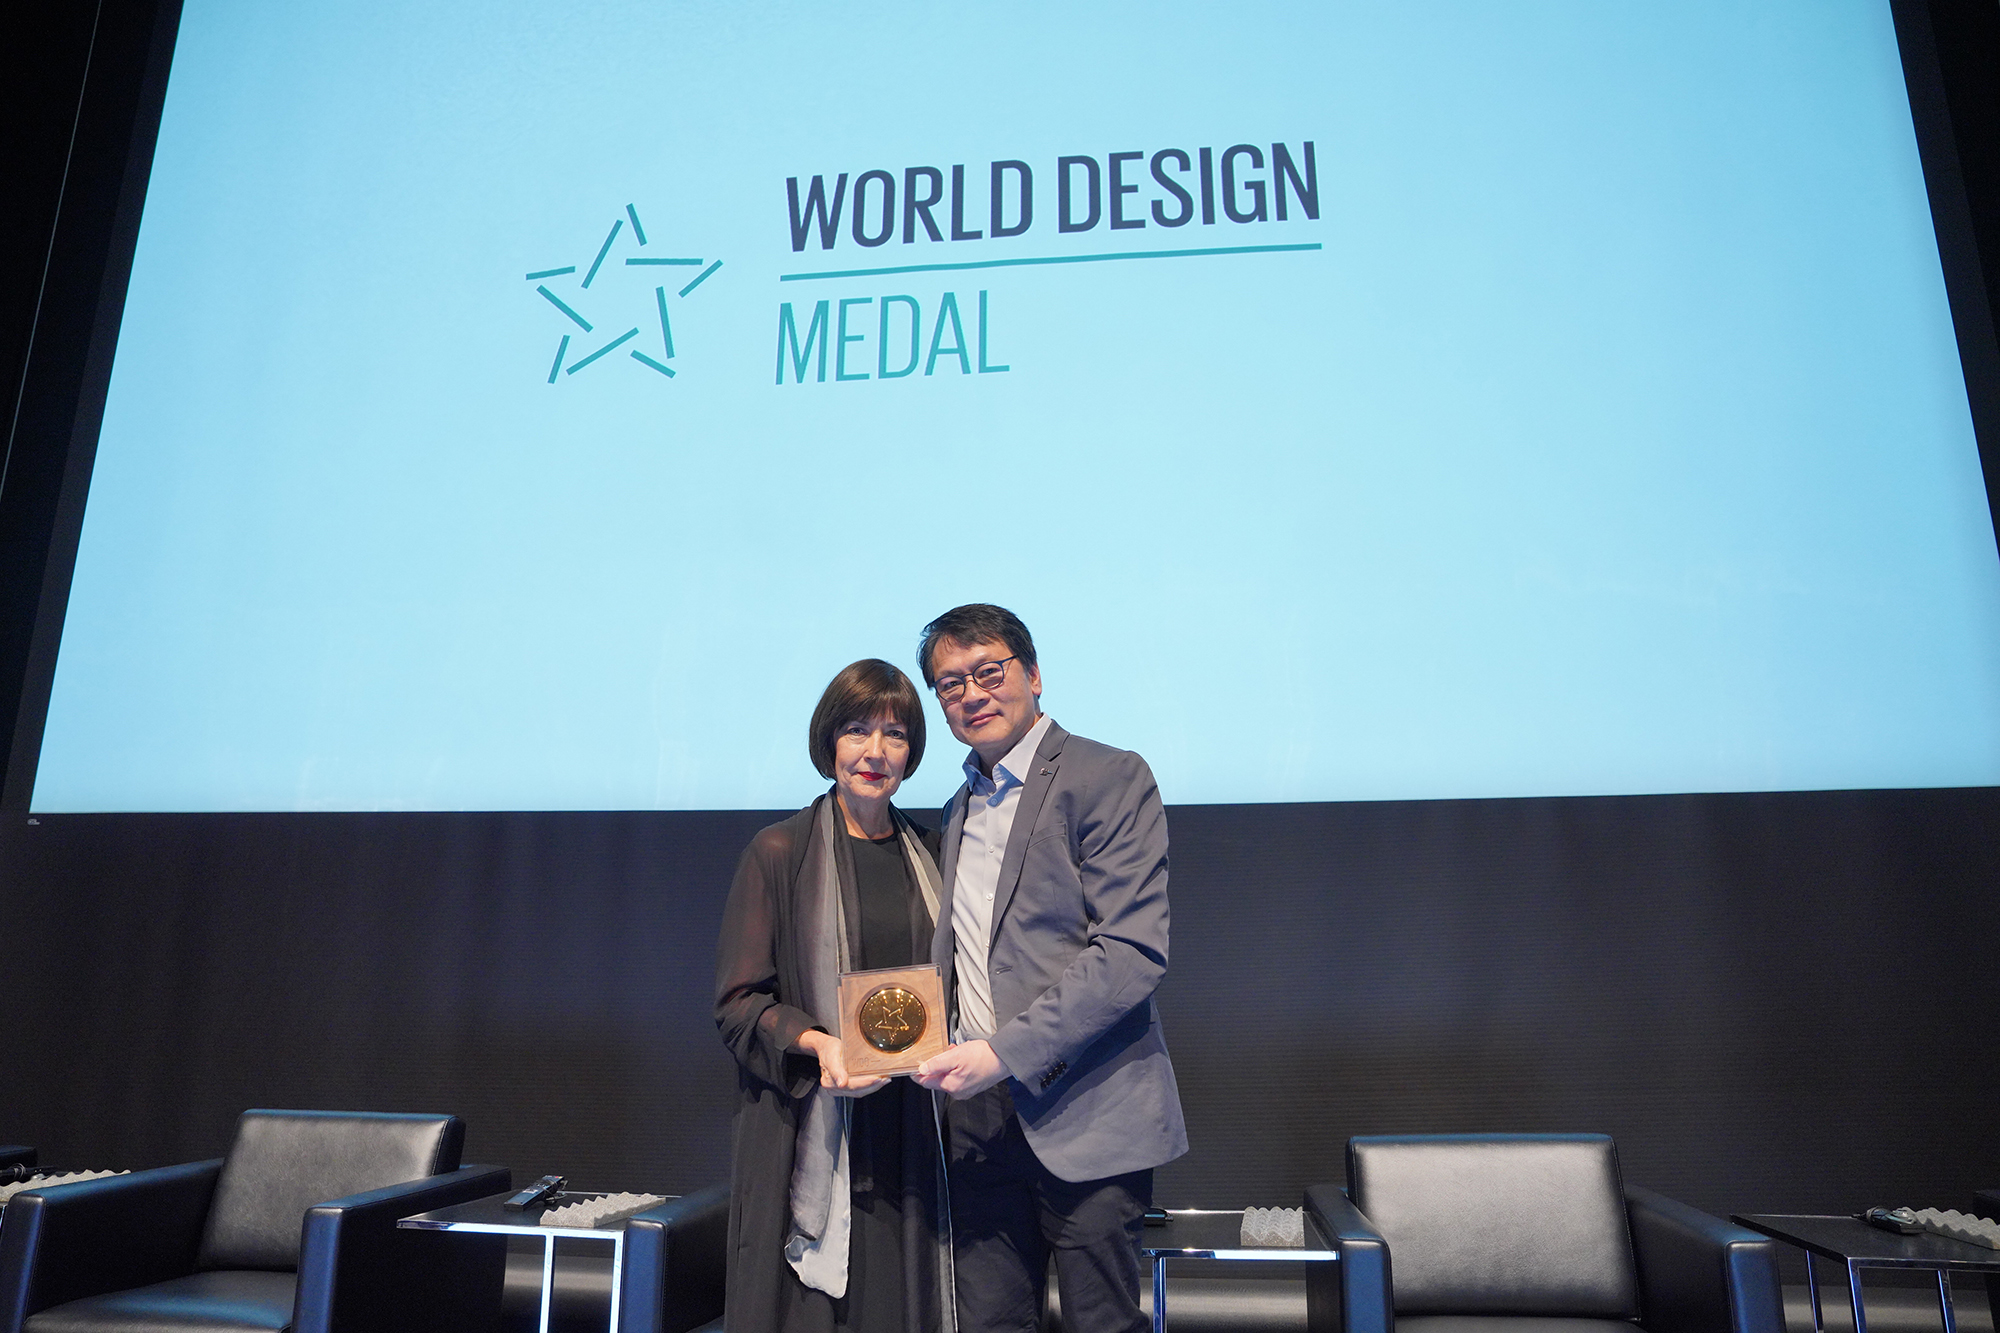 Pattie Moore received the World Design Medal.